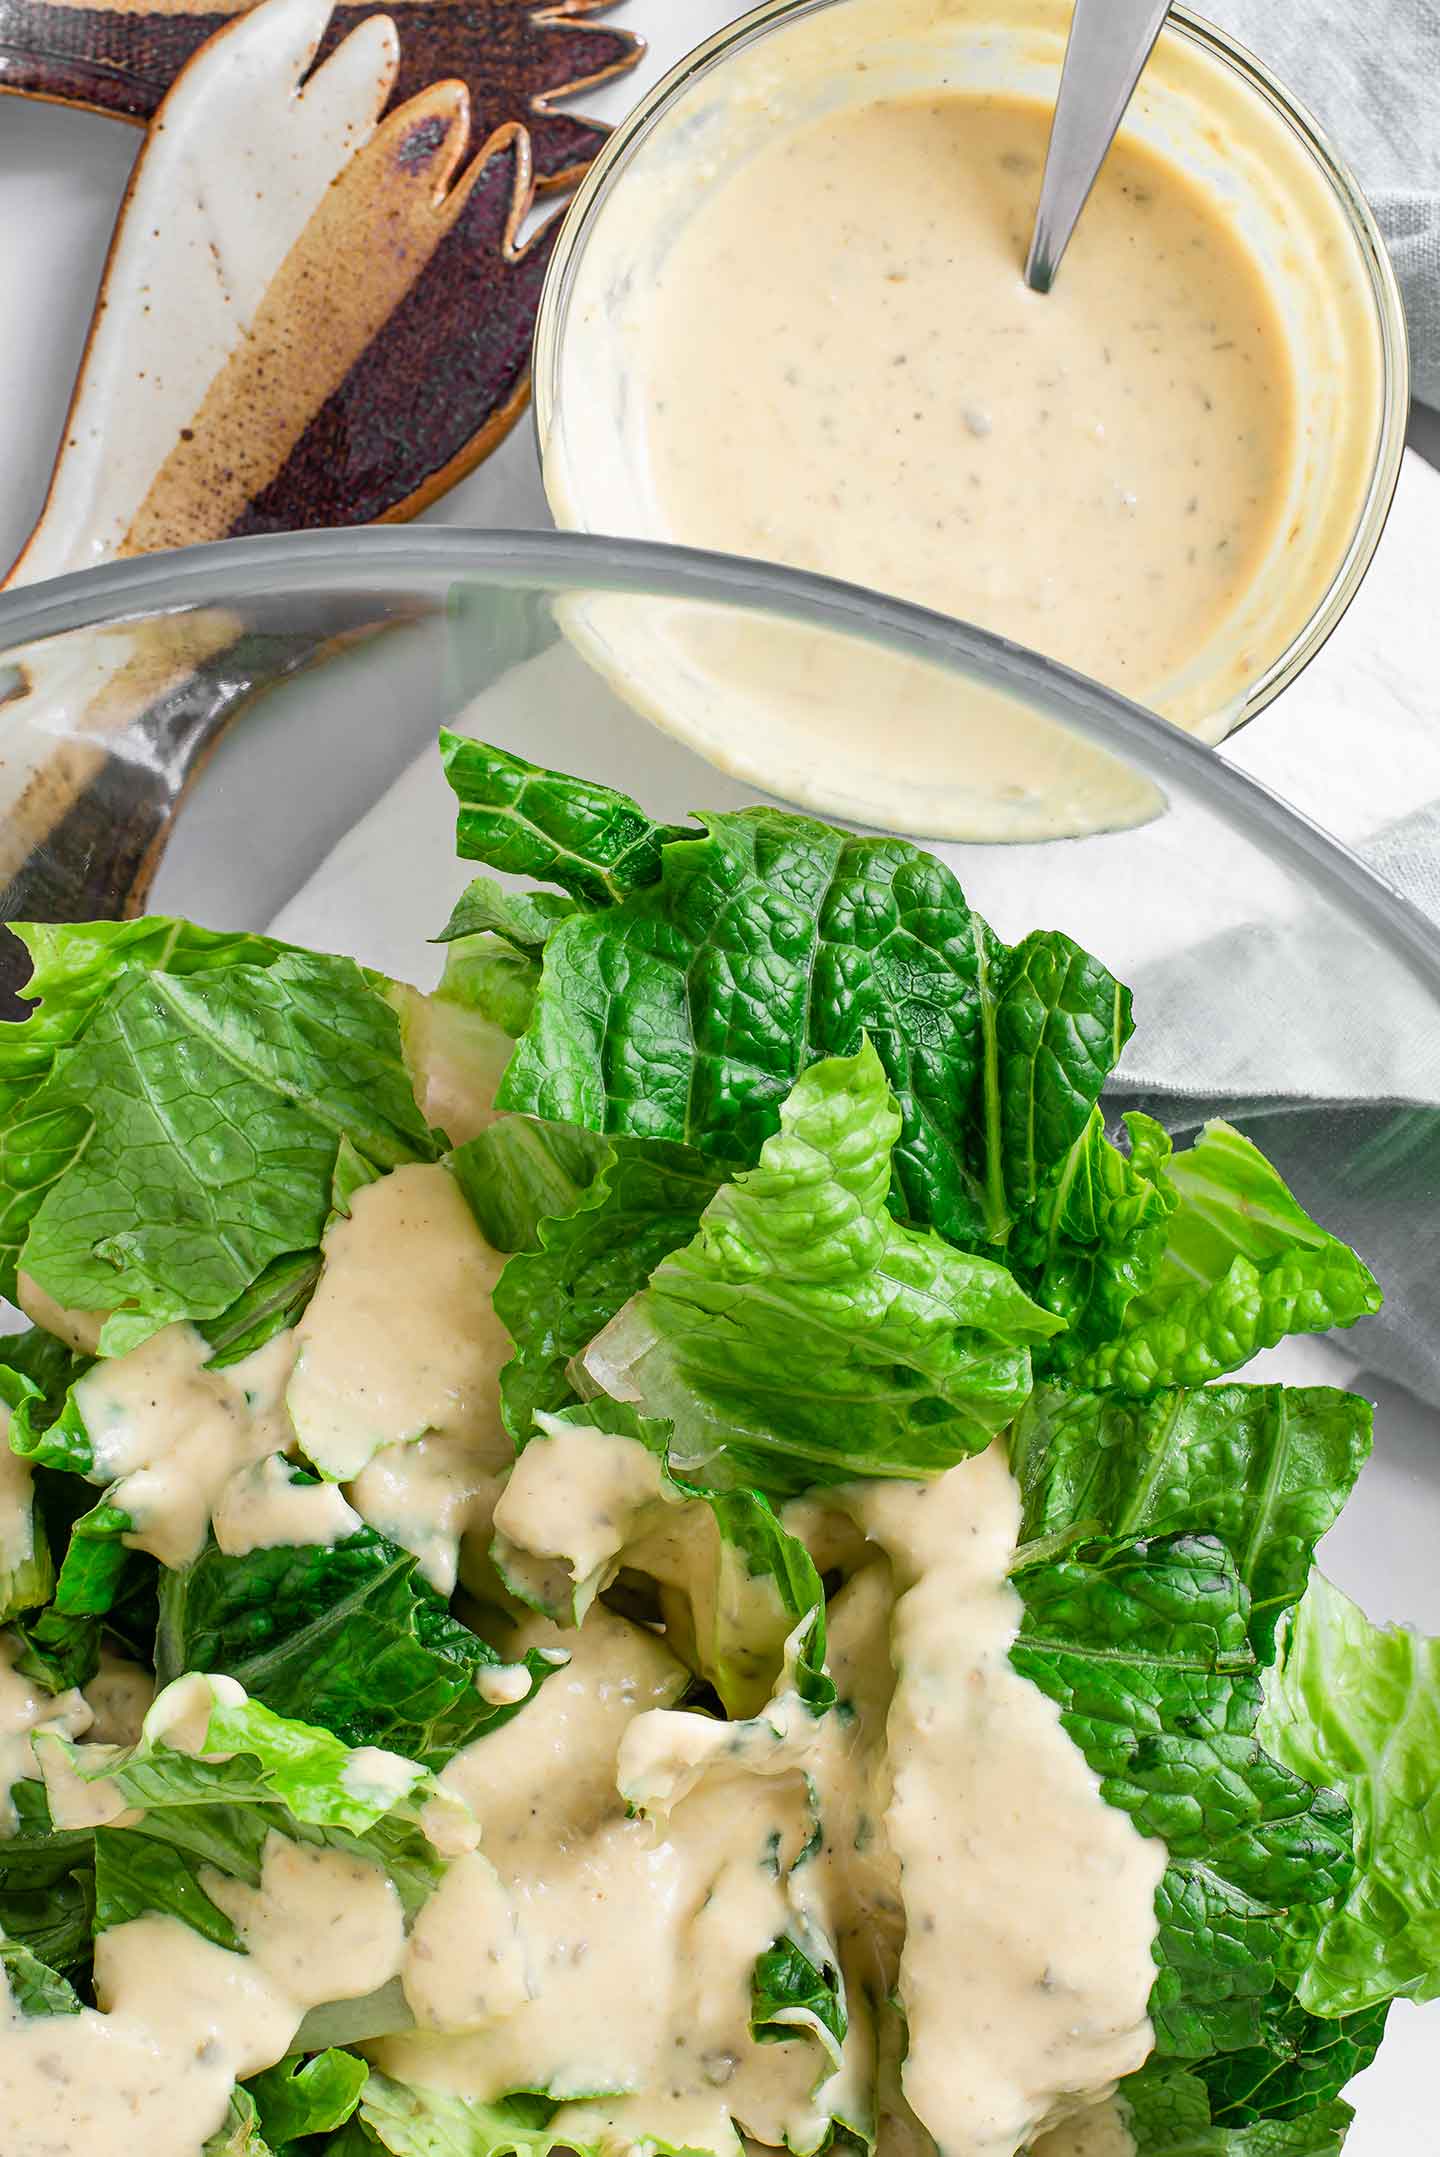 Top down view of chopped romaine lettuce in a large glass bowl with creamy dressing poured on top. A small bowl of dressing stands beside the salad on a white tray with ceramic salad tongs nearby.